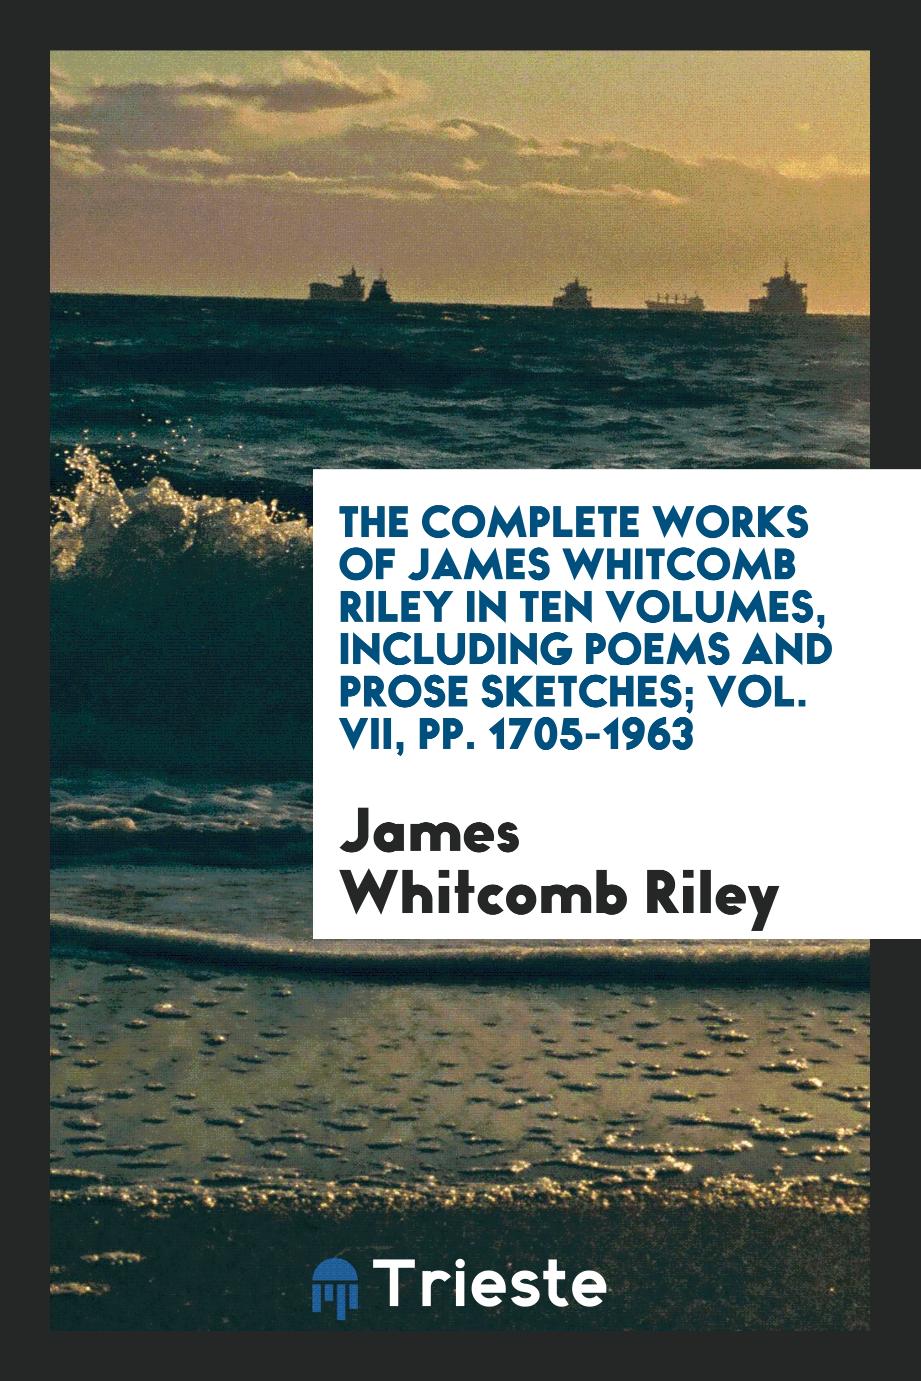 The Complete Works of James Whitcomb Riley in Ten Volumes, including Poems and Prose Sketches; Vol. VII, pp. 1705-1963